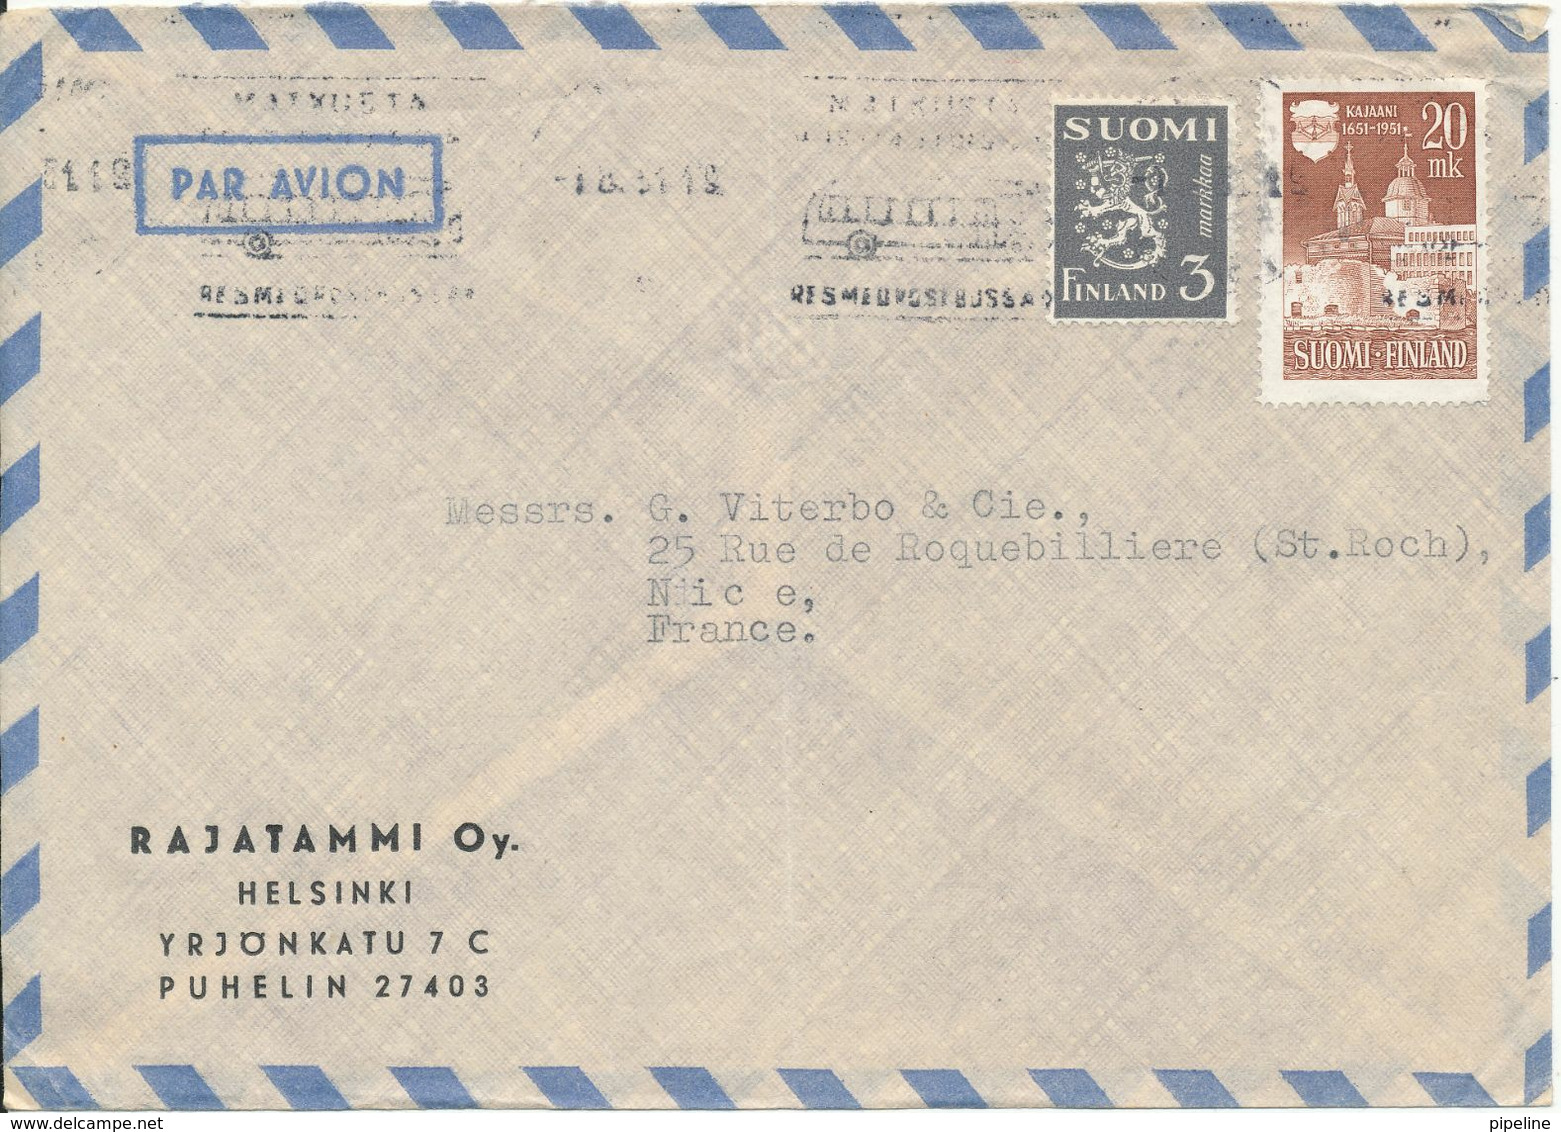 Finland Air Mail Cover Sent To France 1951 (the Cover Is Bended) - Covers & Documents